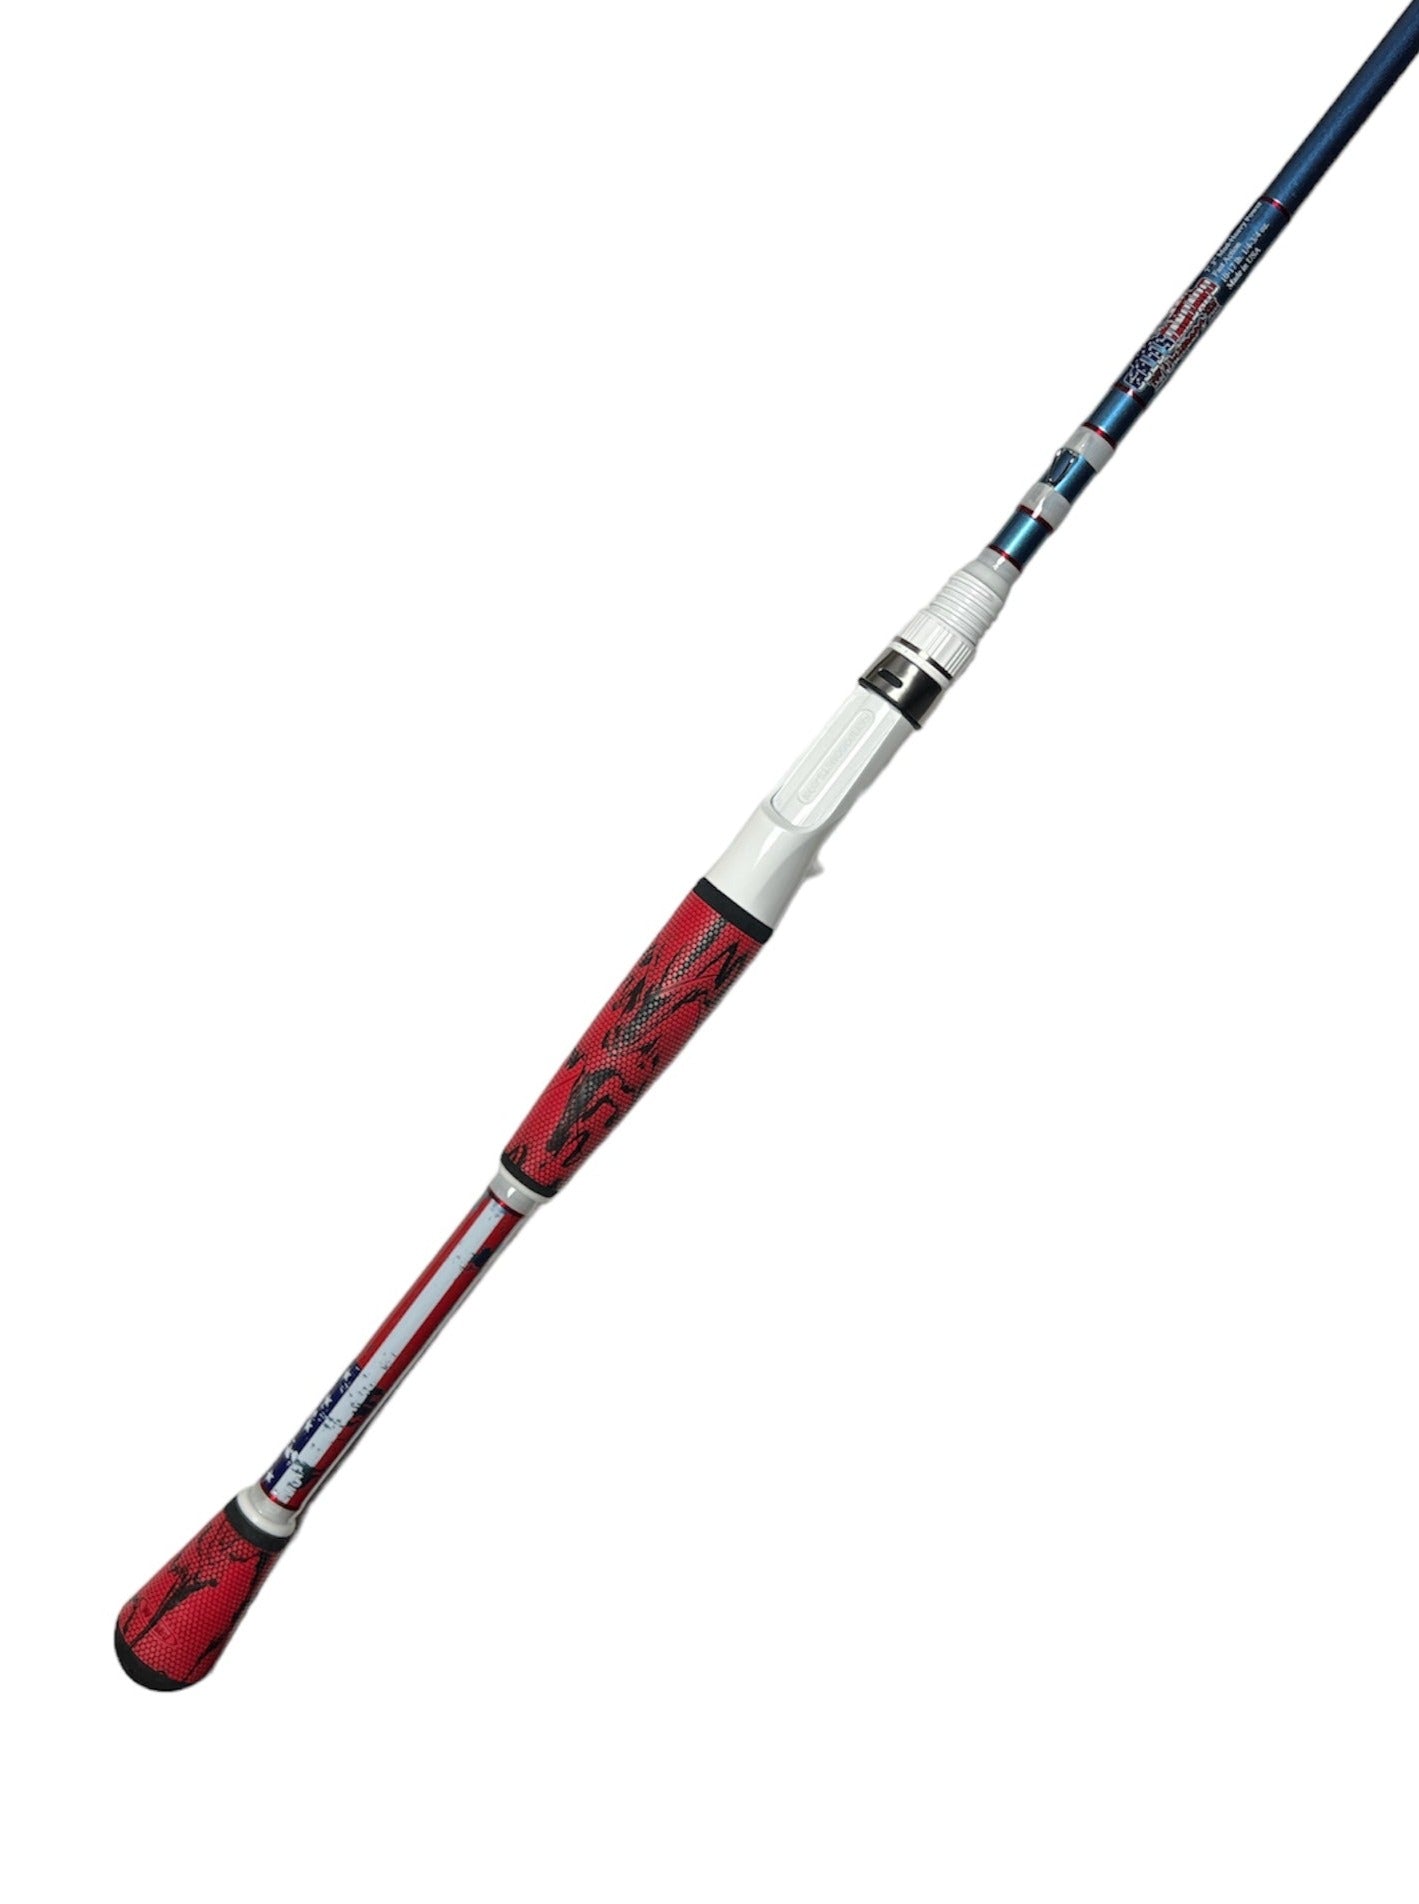 7'3" USA Med-Heavy Power Fast Action Pre-Built Casting Rod